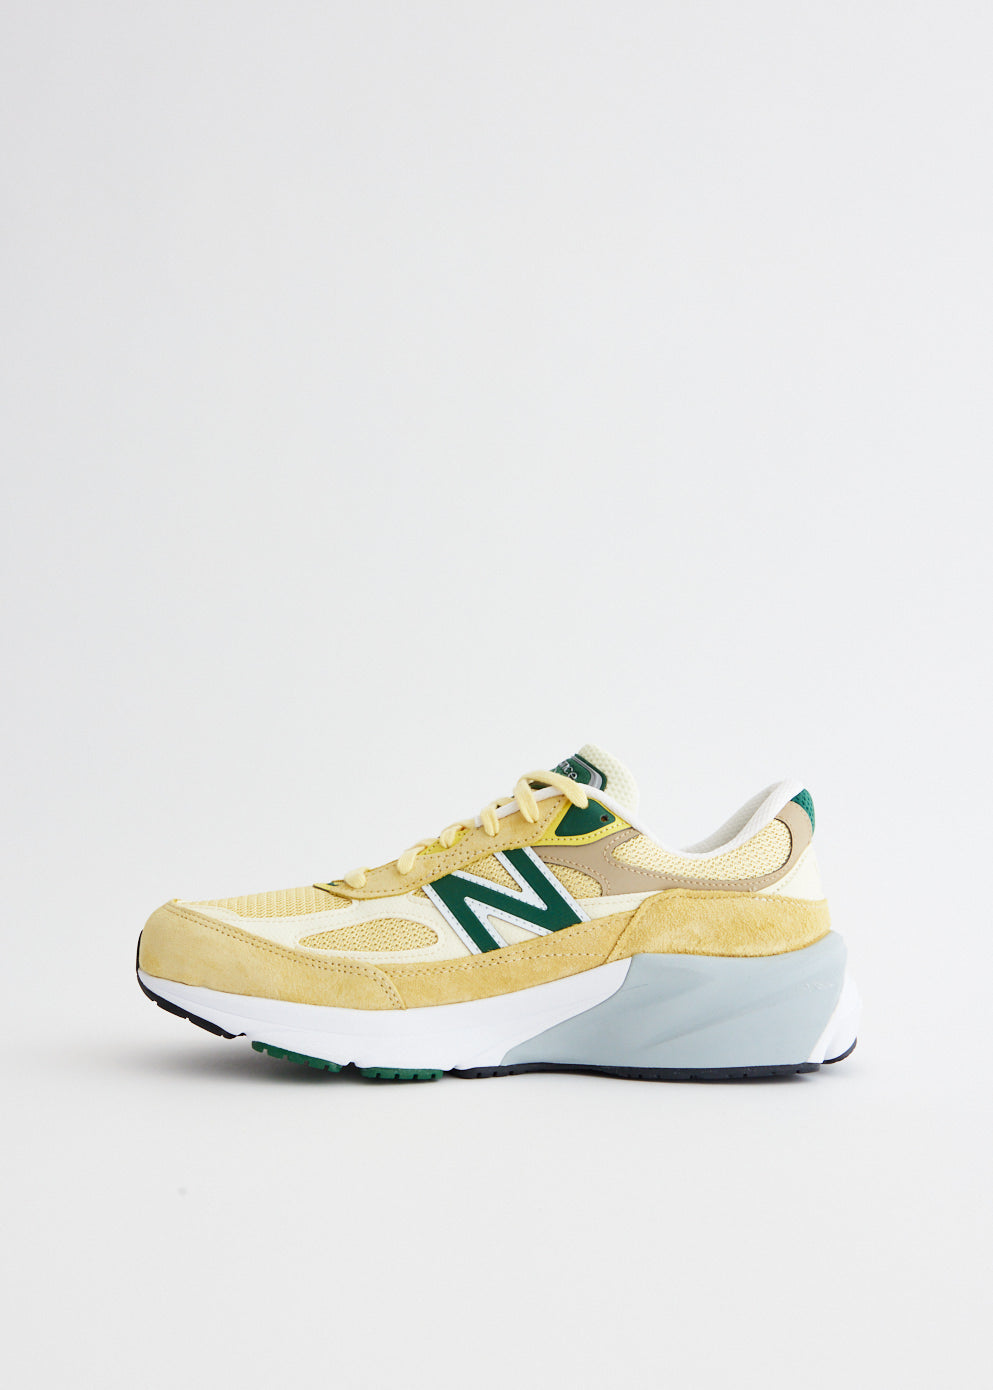 MADE in USA 990v6 'Pale Yellow' Sneakers